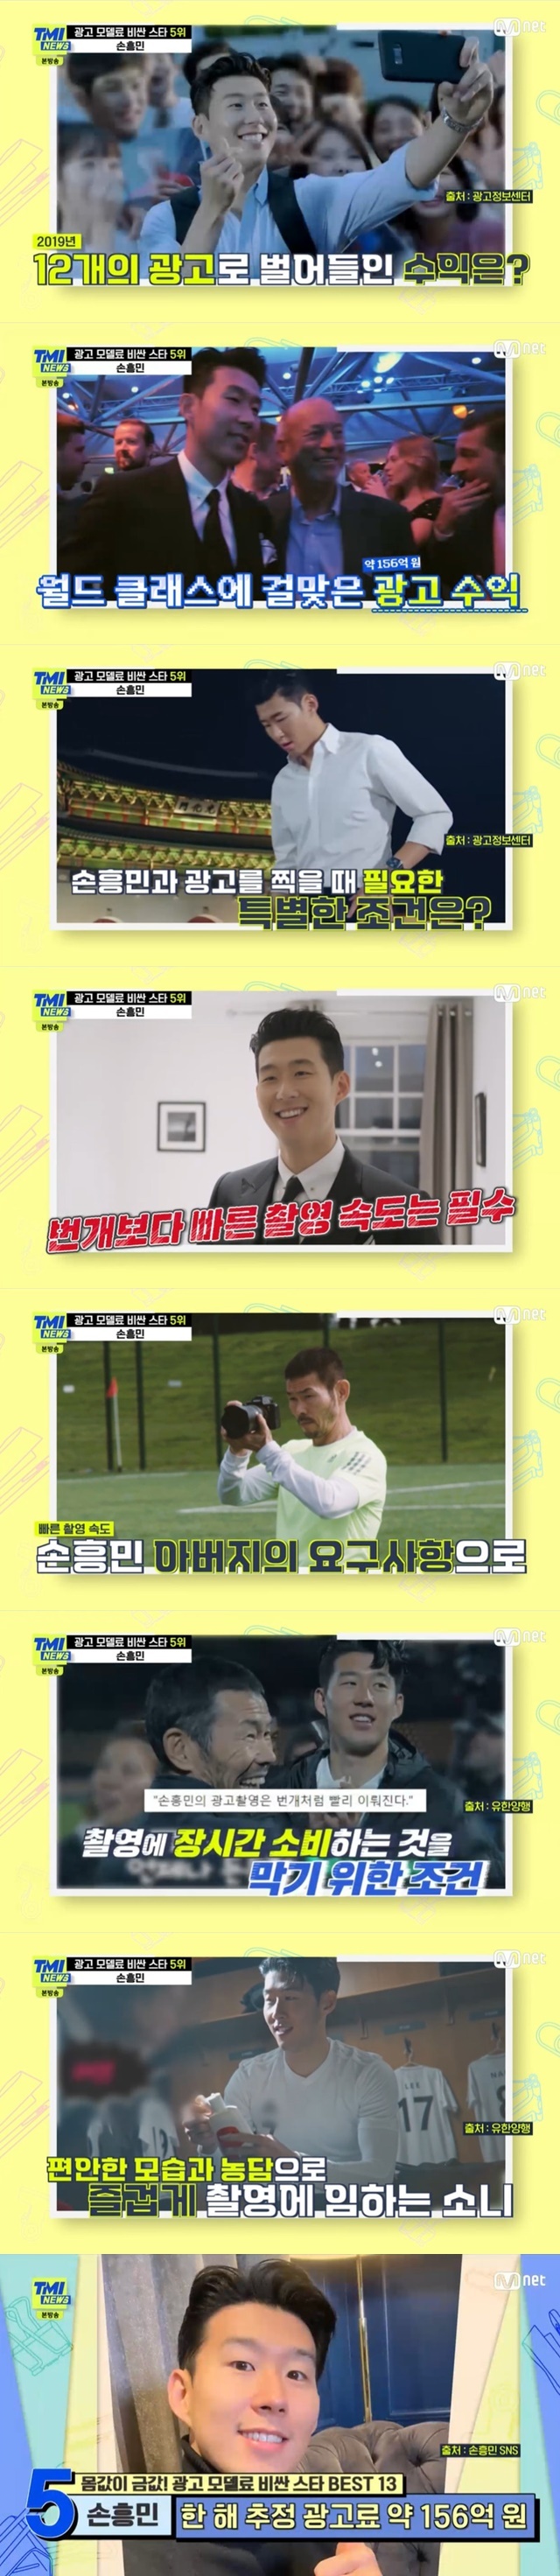 Soccer player Son Heung-min has been ranked fifth in the expensive star for advertising model, and his fathers special model conditions have been revealed.Mnets TMI News, which aired on August 4, revealed the ranking of star BEST13, which is expensive for advertising models.On the day, Son Heung-min ranked fifth in the advertising model price with an estimated advertising model fee of 15.6 billion won a year.Son Heung-min has appeared in 12 product ads in 2019, including shampoo, ramen, cars, razors and sports drinks, and has a great commercial appeal, Forbes also praised.The ice cream company, which became famous for its model Son Heung-min, has been looking for a model with a wide range of awareness regardless of sex, and has increased its sales more than five times after advertising Son Heung-min.Son Heung-min has a soccer player salary of 300 million won a week, and advertising fees of at least 1.2 billion won per year.In 2019, it earned about 15.6 billion won in 12 ads.Son Heung-mins commercial shooting has special conditions, but the shooting speed should be faster than lightning.Son Heung-mins father walked the terms to prevent his son, who had to focus on football, from spending a long time on set.It seems a bit tricky, but Son Heung-min said he was joking comfortably on the commercial.